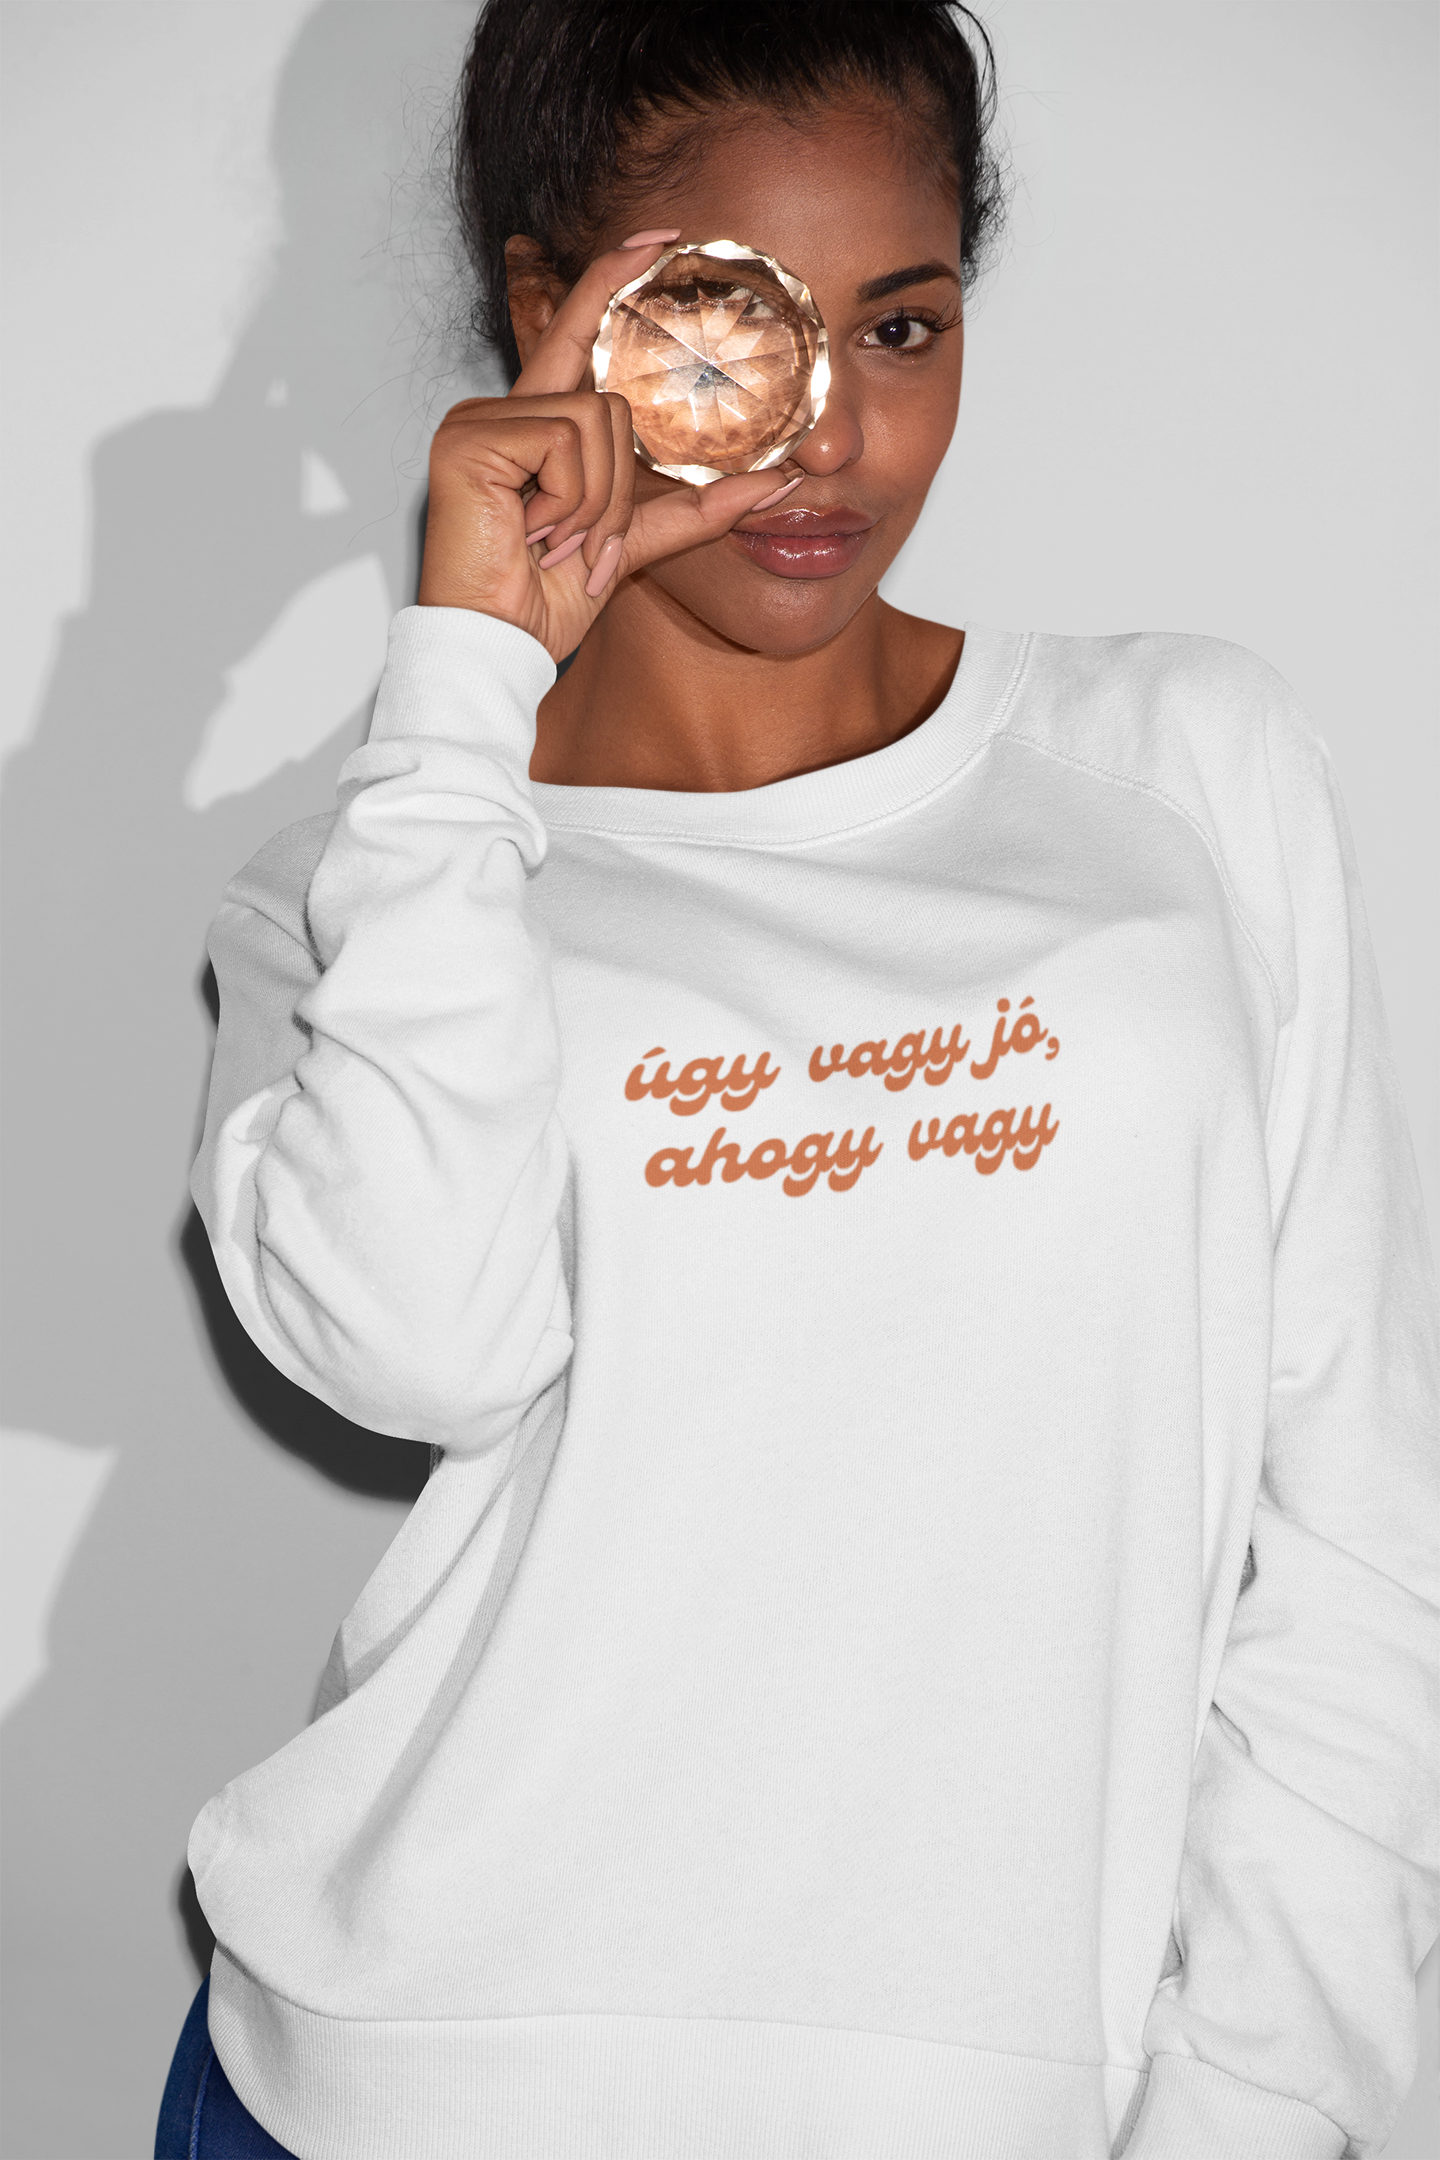 You are good the way you are - Women's Hoodie